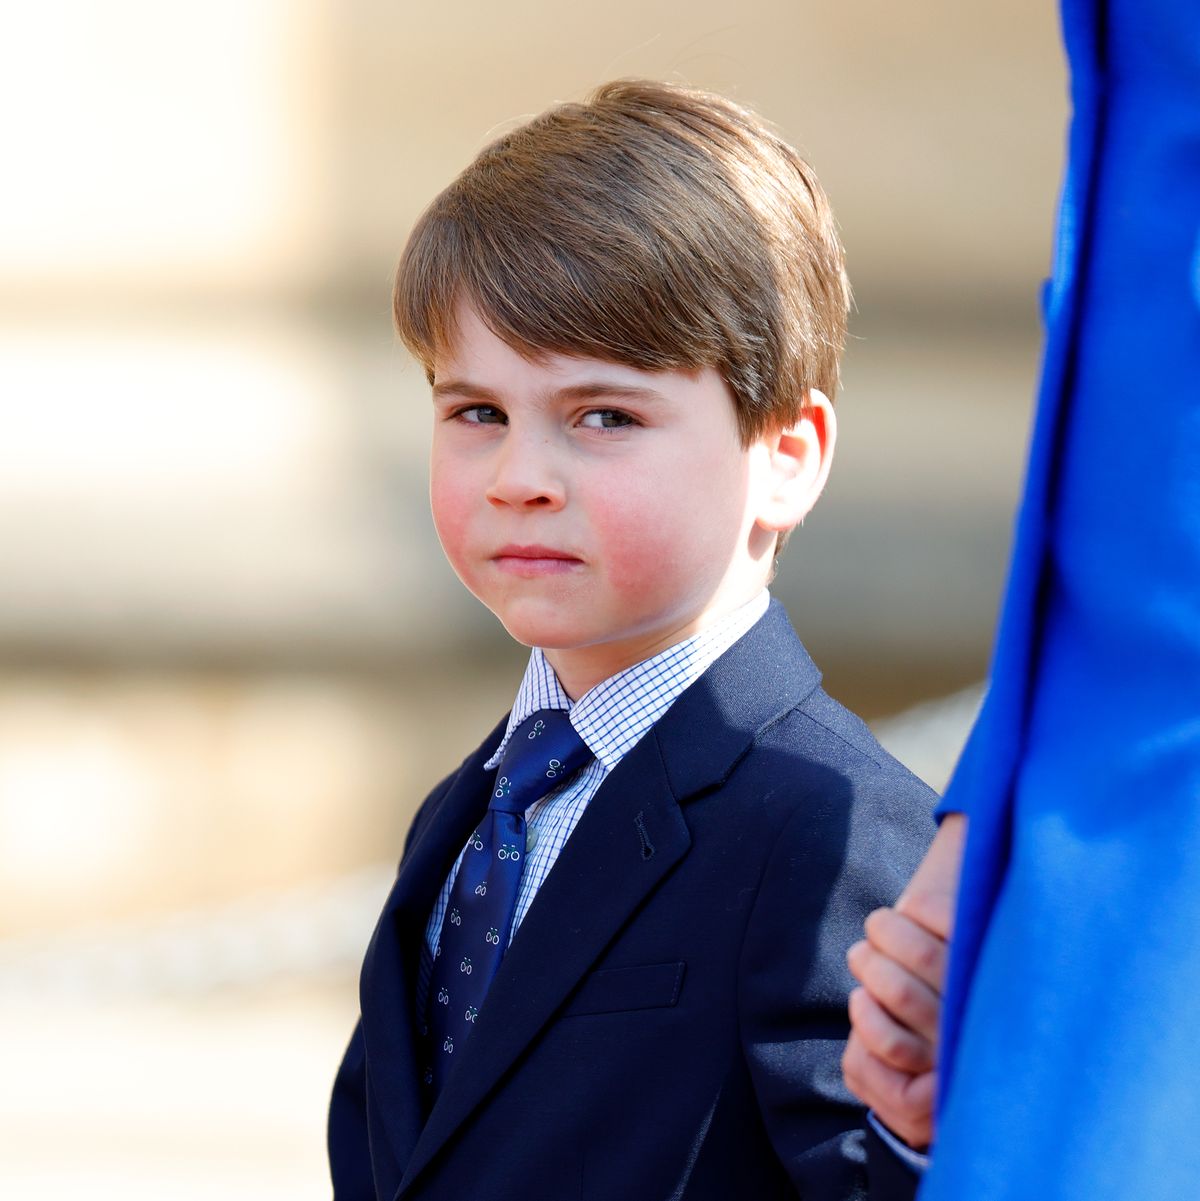 New photos of Prince Louis released to mark his fifth birthday